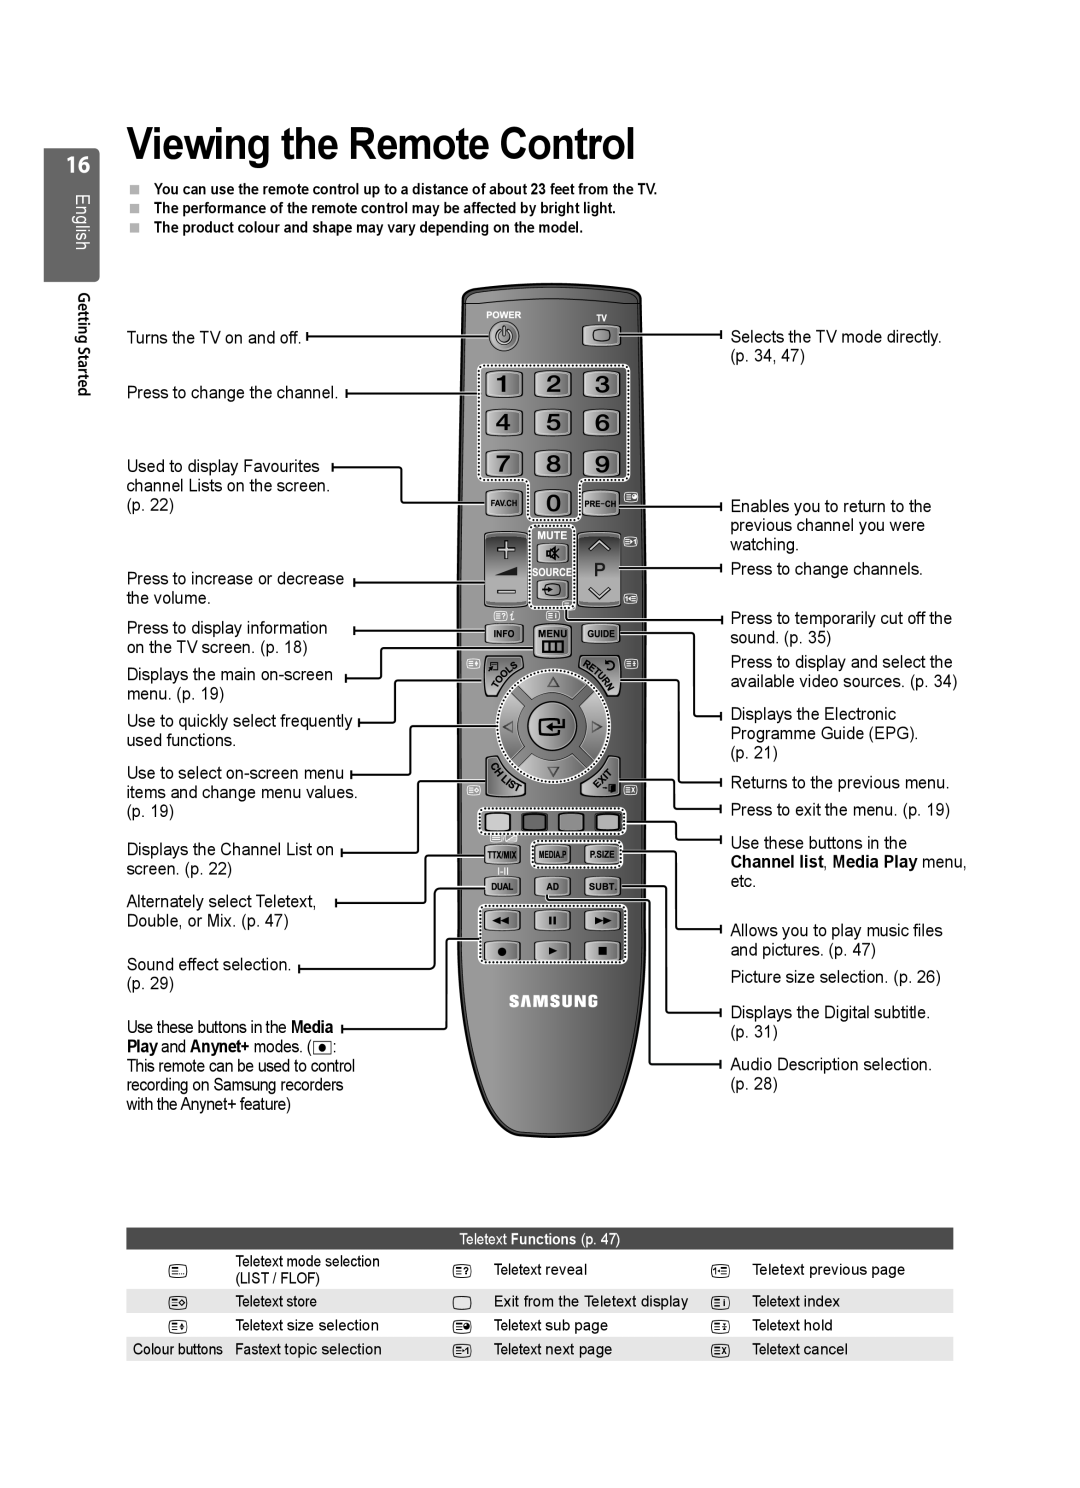 Samsung LE40B550, LE40B554, LE40B551, LE40B553, LE46B550, LE46B553 Viewing the Remote Control, Play and Anynet+ modes. ∏ 